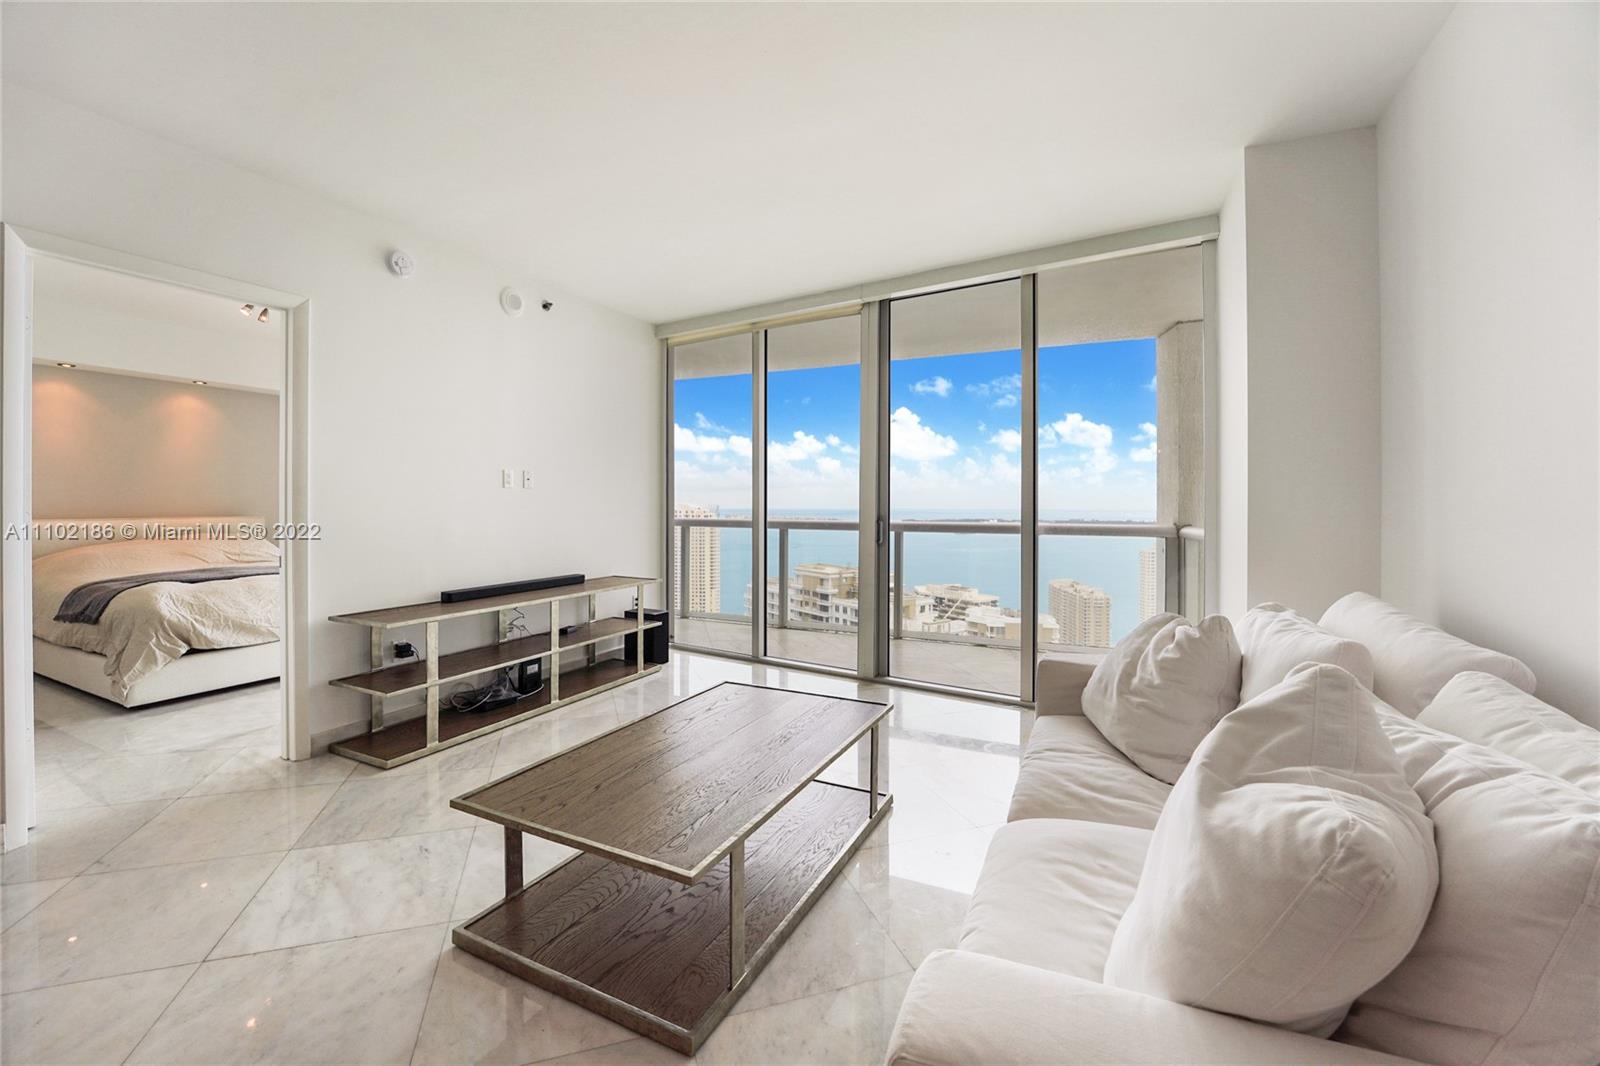 475  Brickell Ave #4007 For Sale A11102186, FL